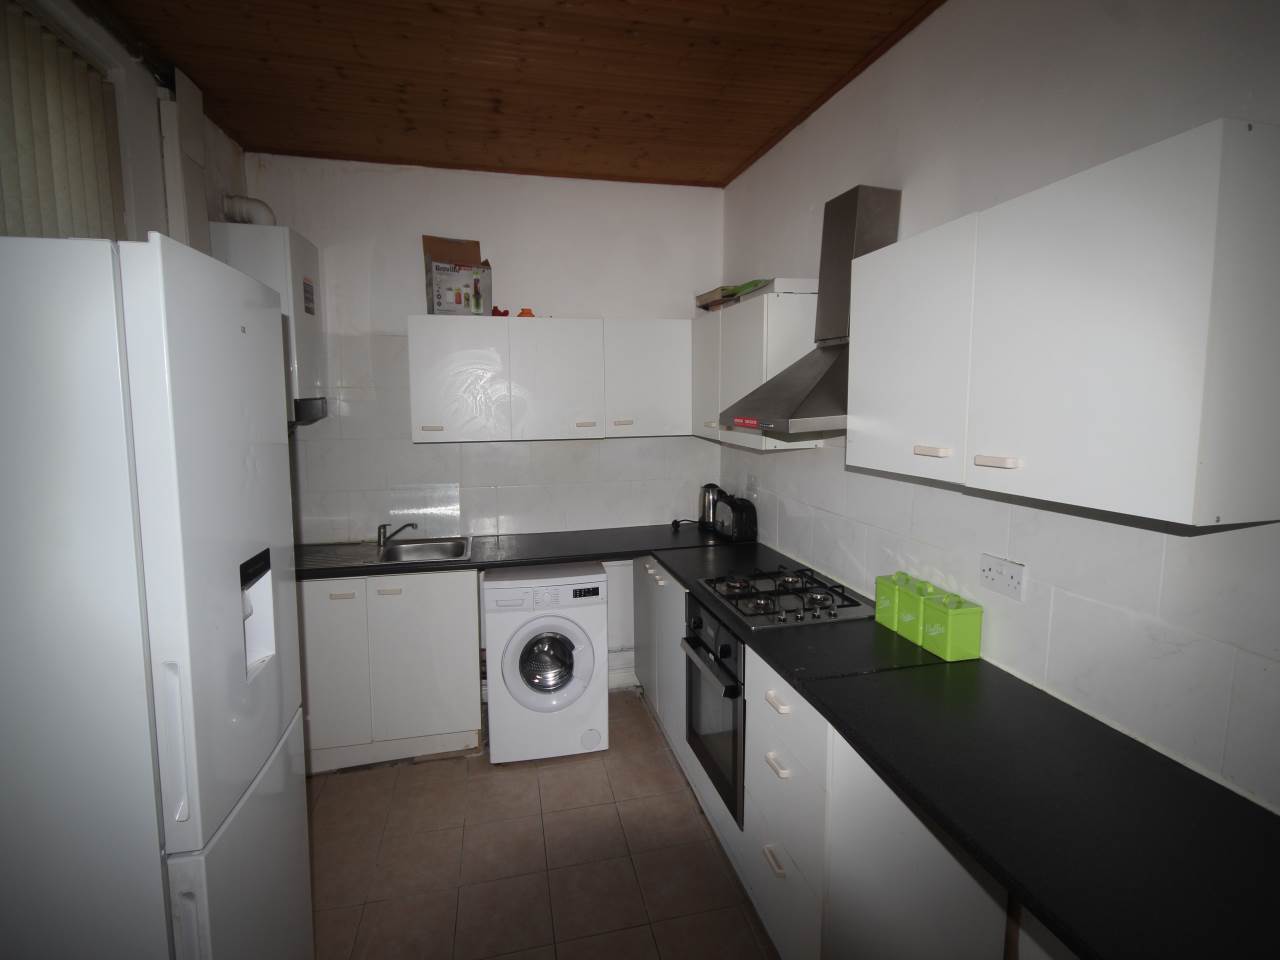 1 bed house / flat share to rent in Little Horton Lane  - Property Image 4